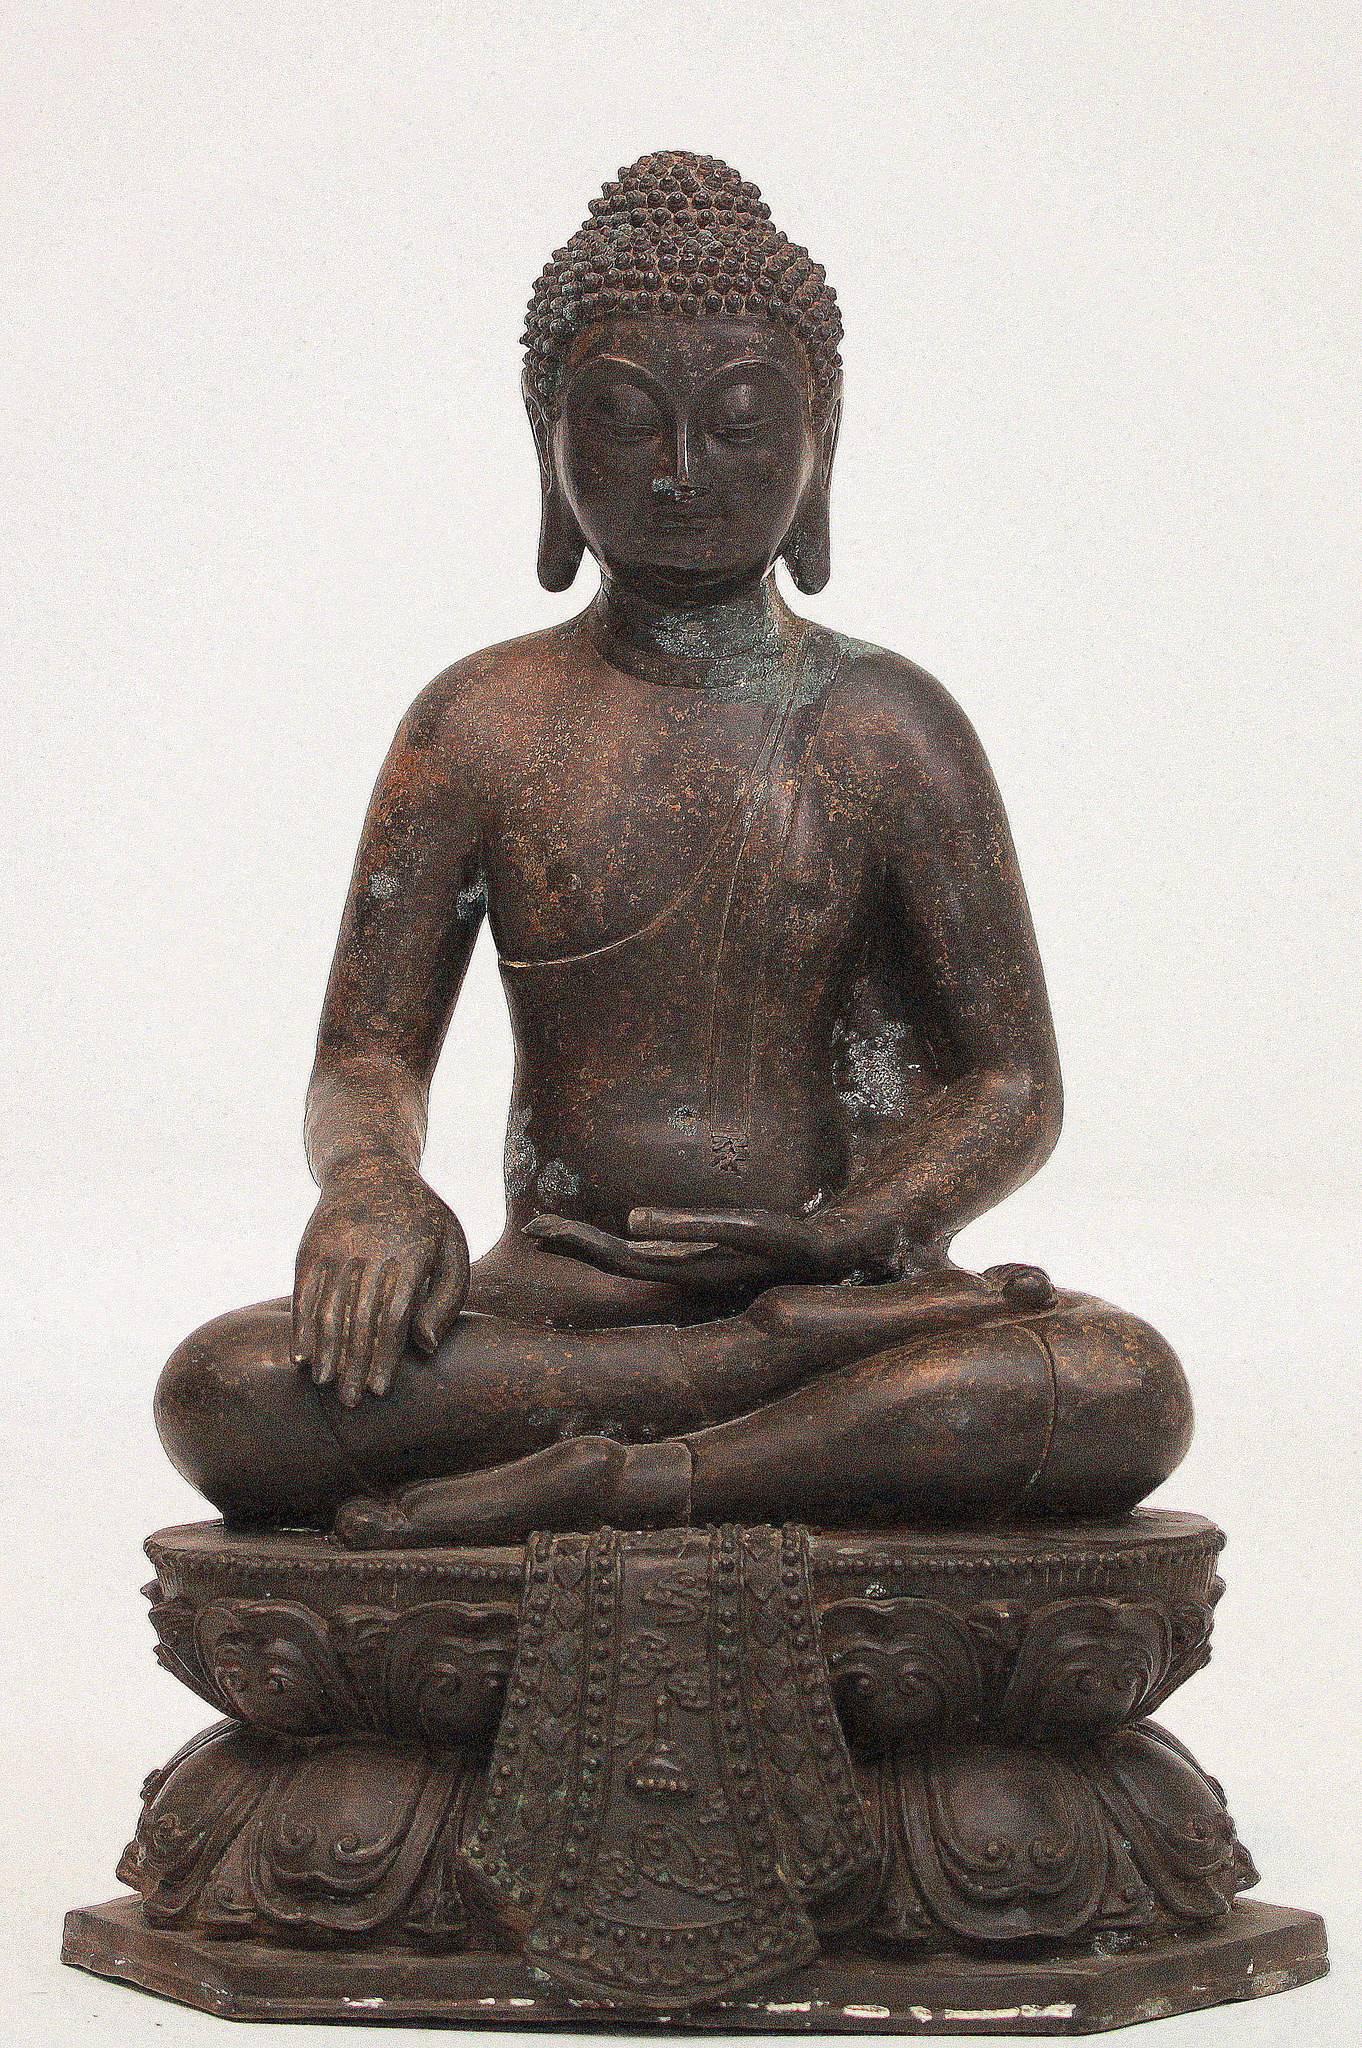 A 19th Century or earlier sitting bronze Buddha on a double lotus pedestal. Measures: 21